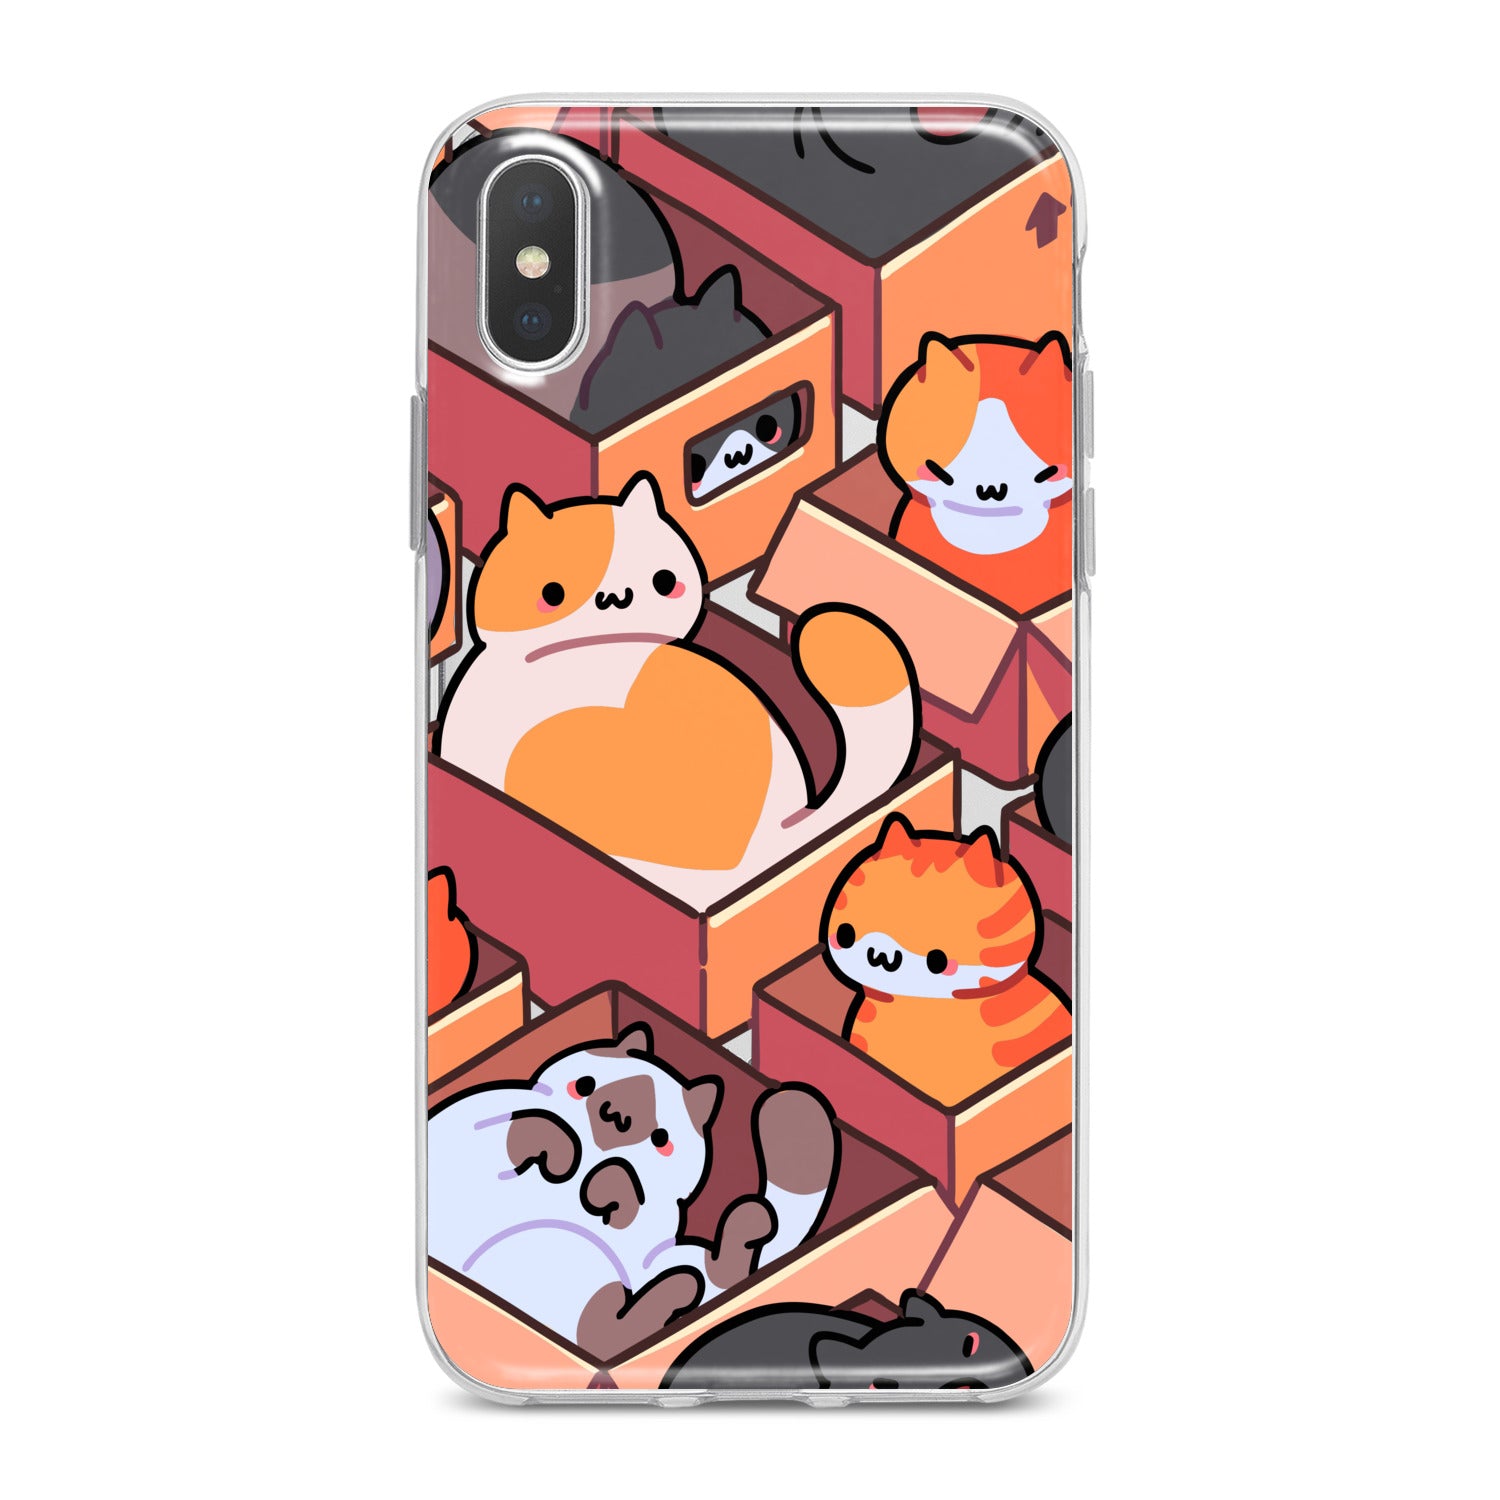 Lex Altern Cats in Boxes Phone Case for your iPhone & Android phone.